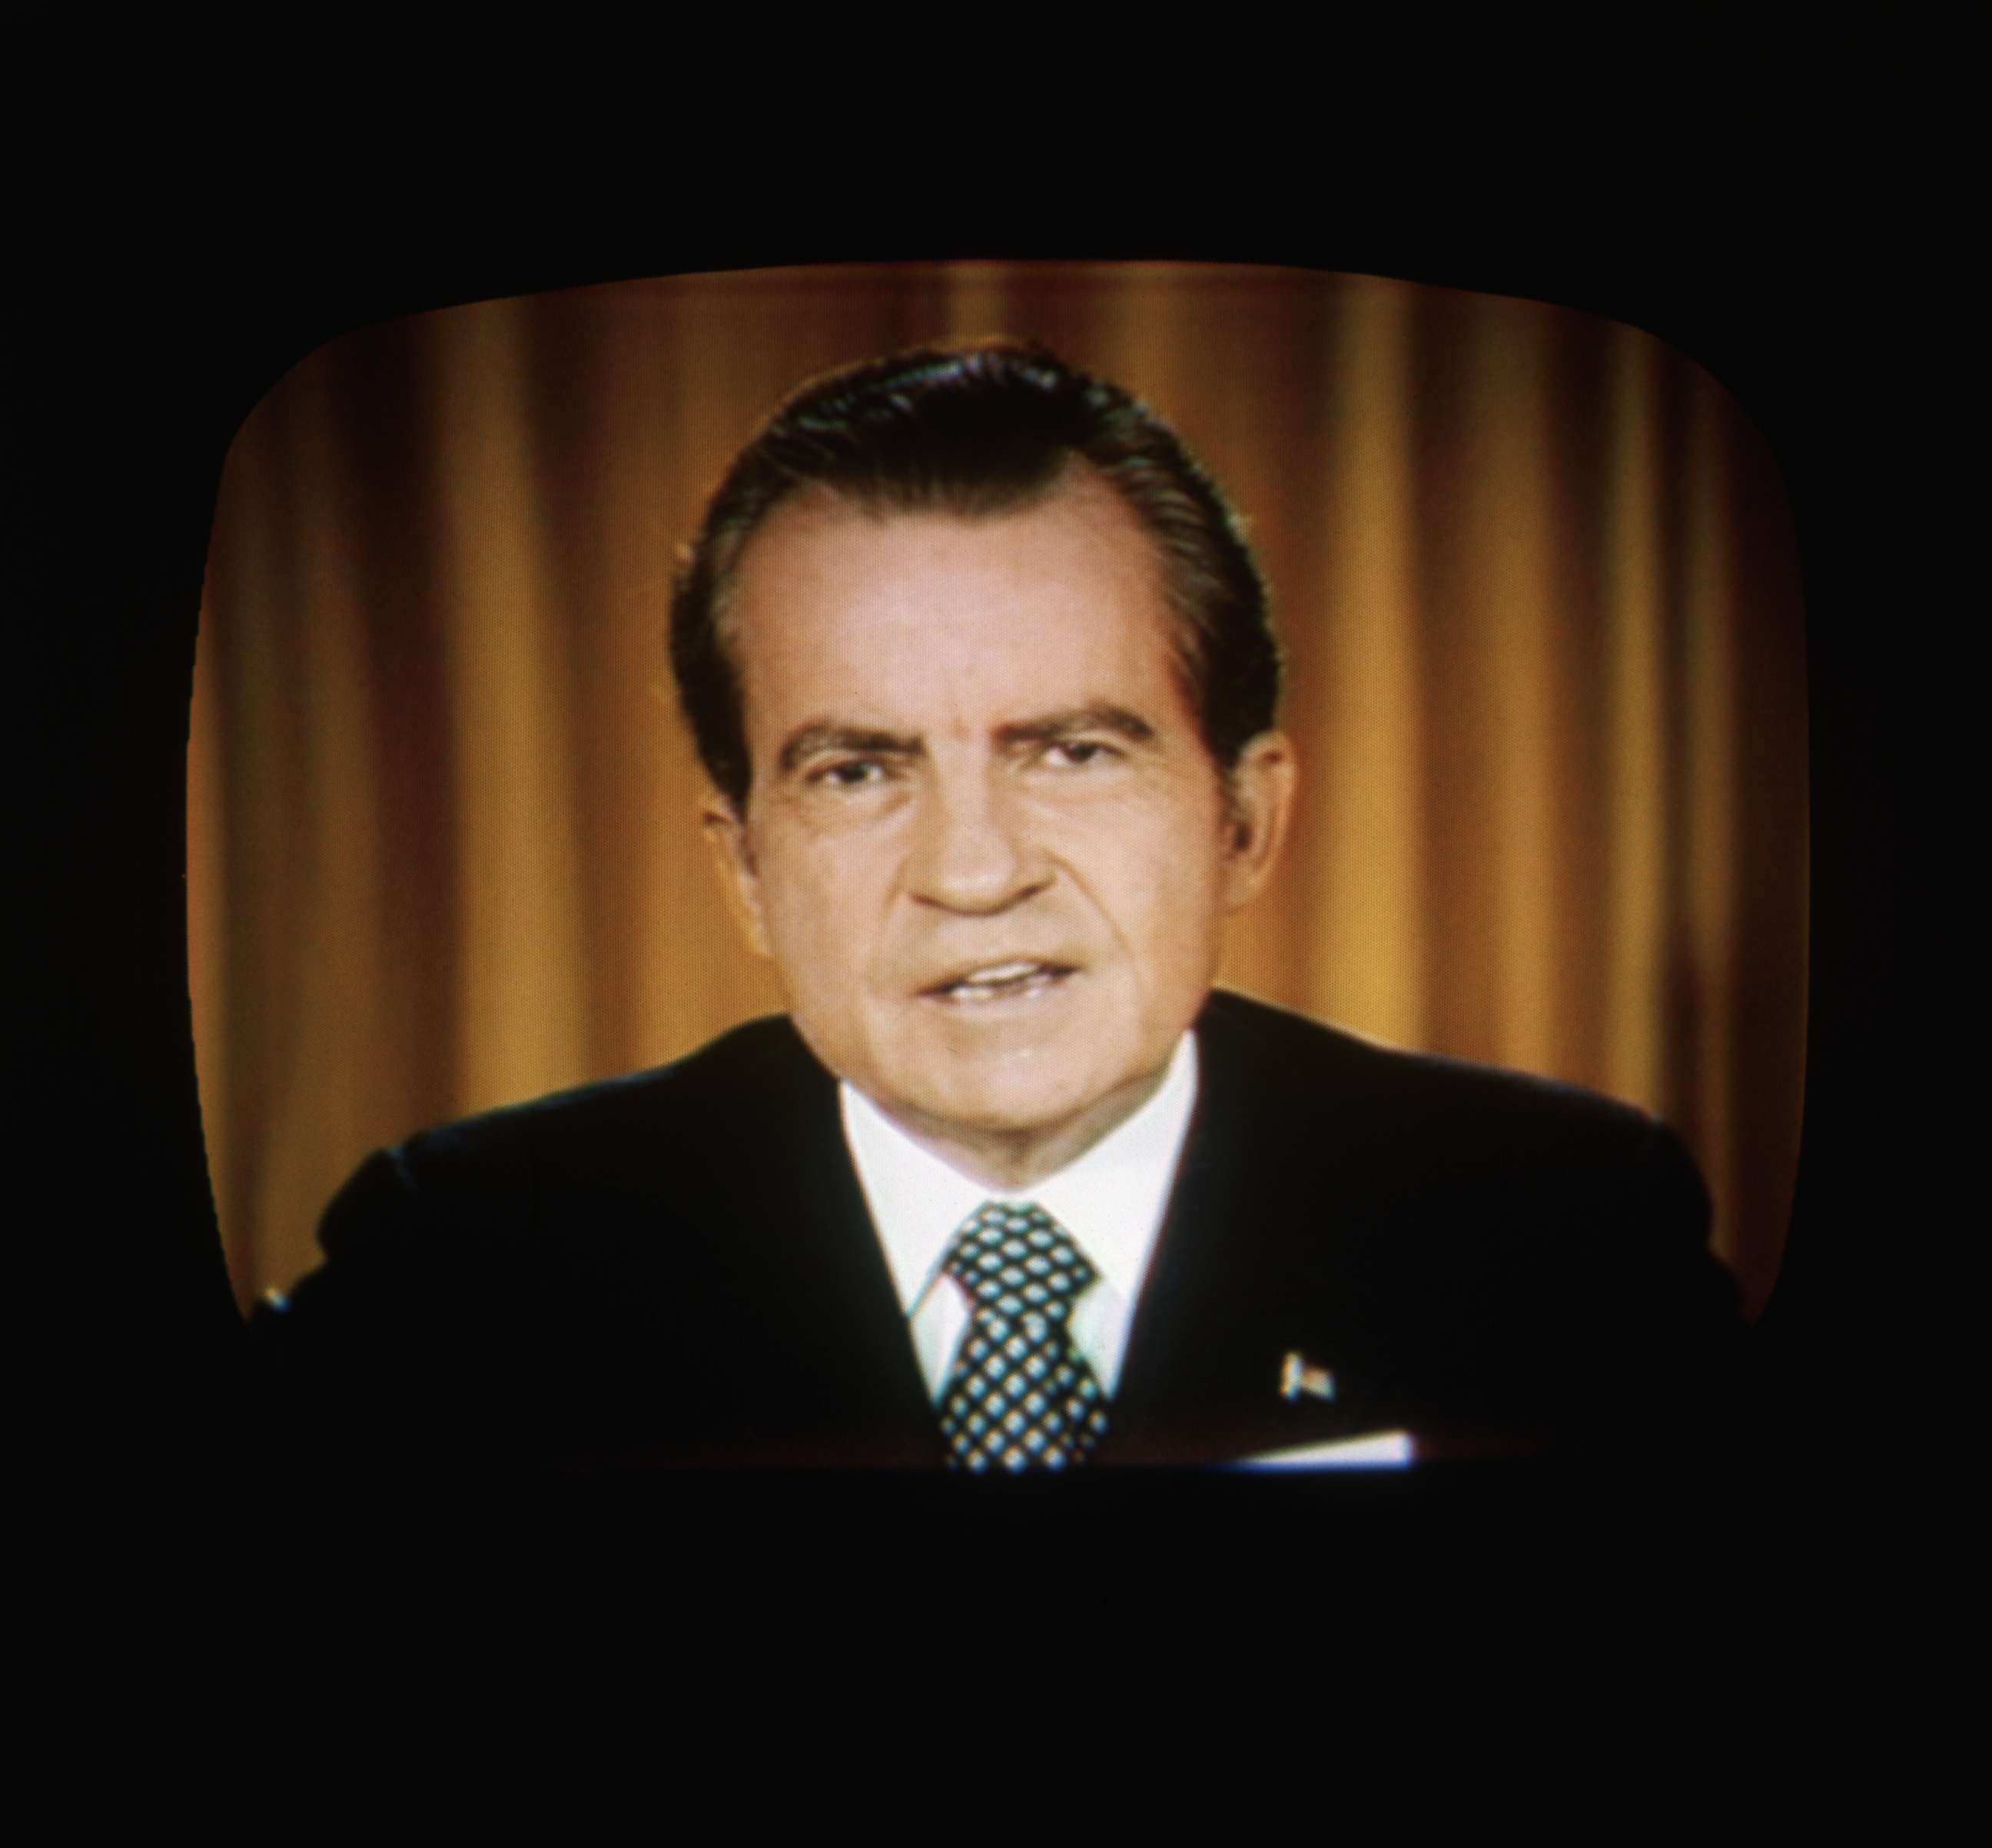 PHOTO: President Richard Nixon addresses the nation on television about the Watergate investigations, April 30, 1973.